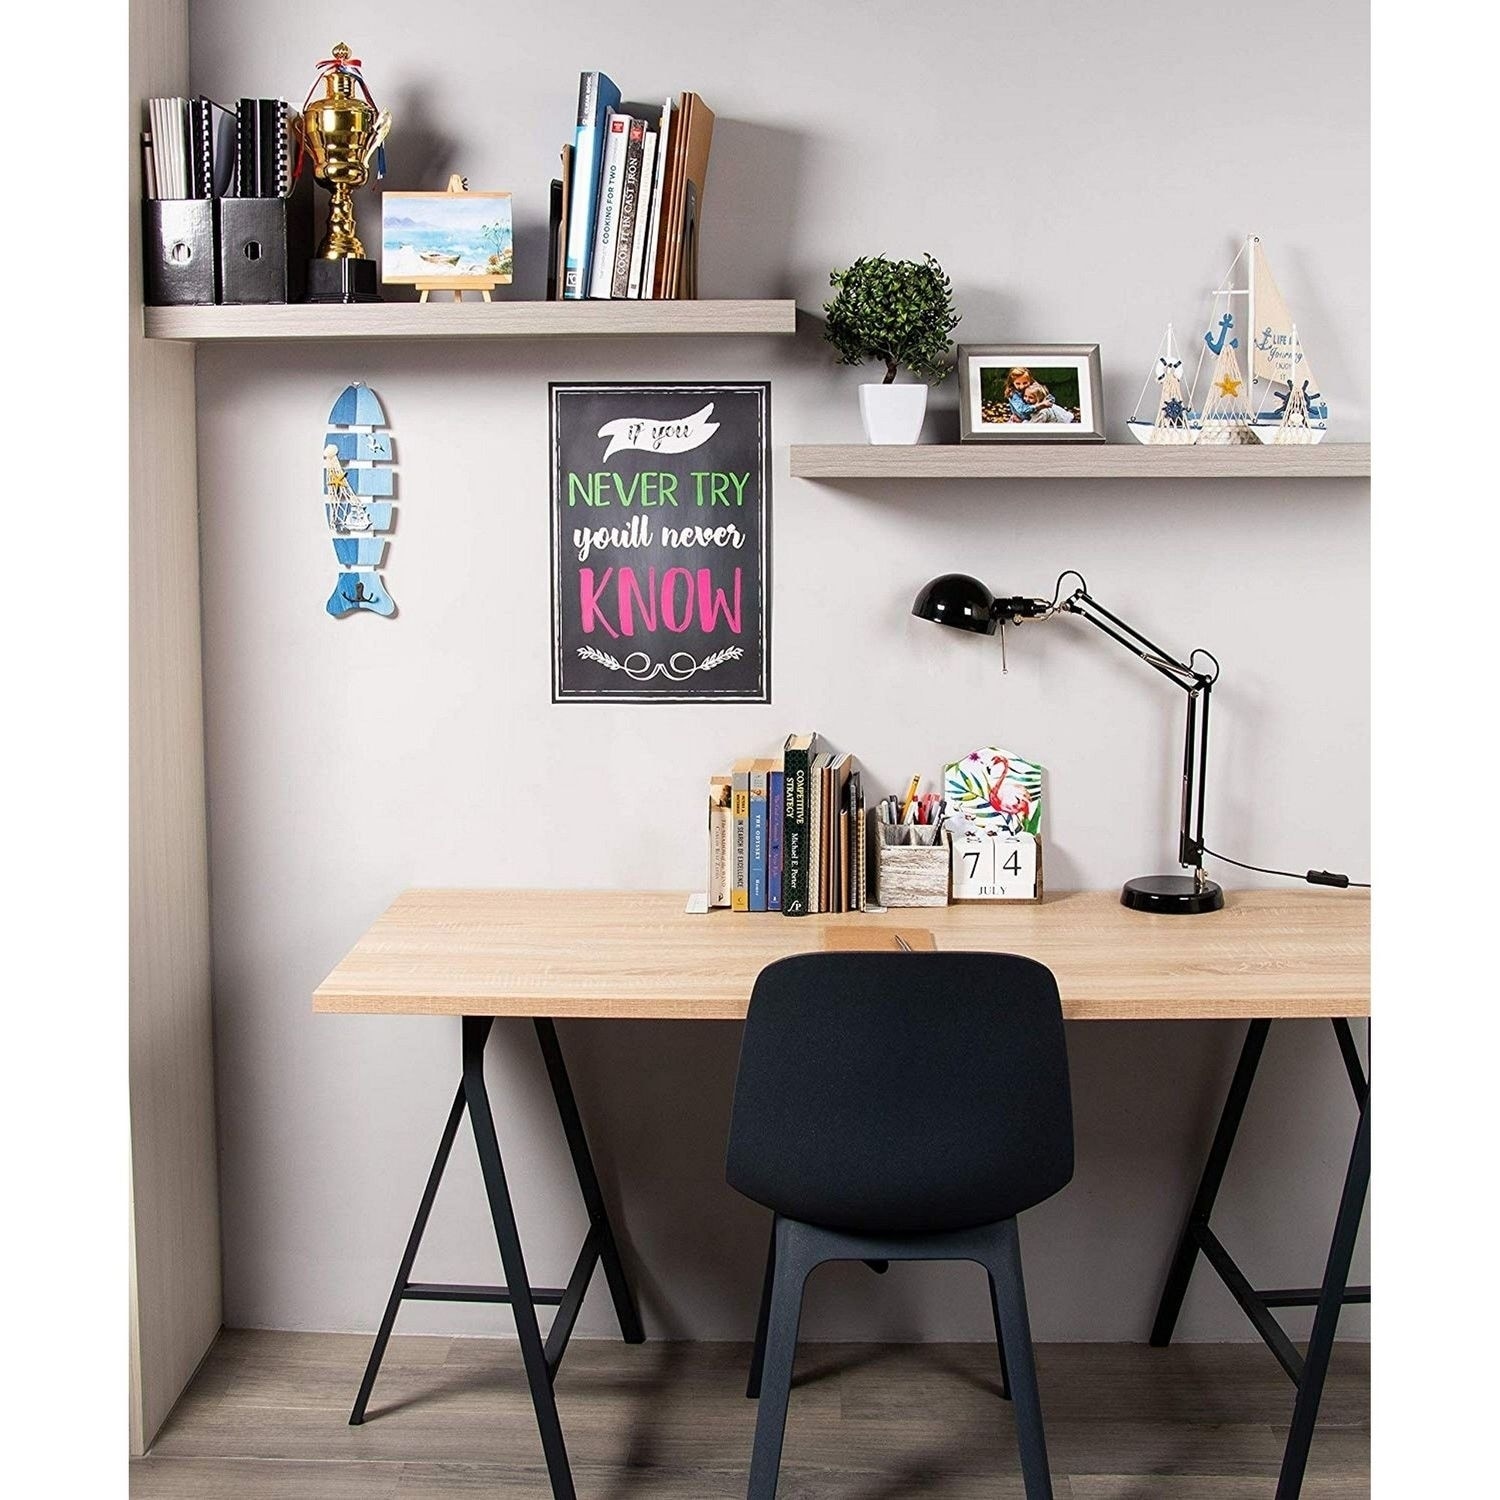 66+ Inspirational Quotes For Office Desk | Theinicio